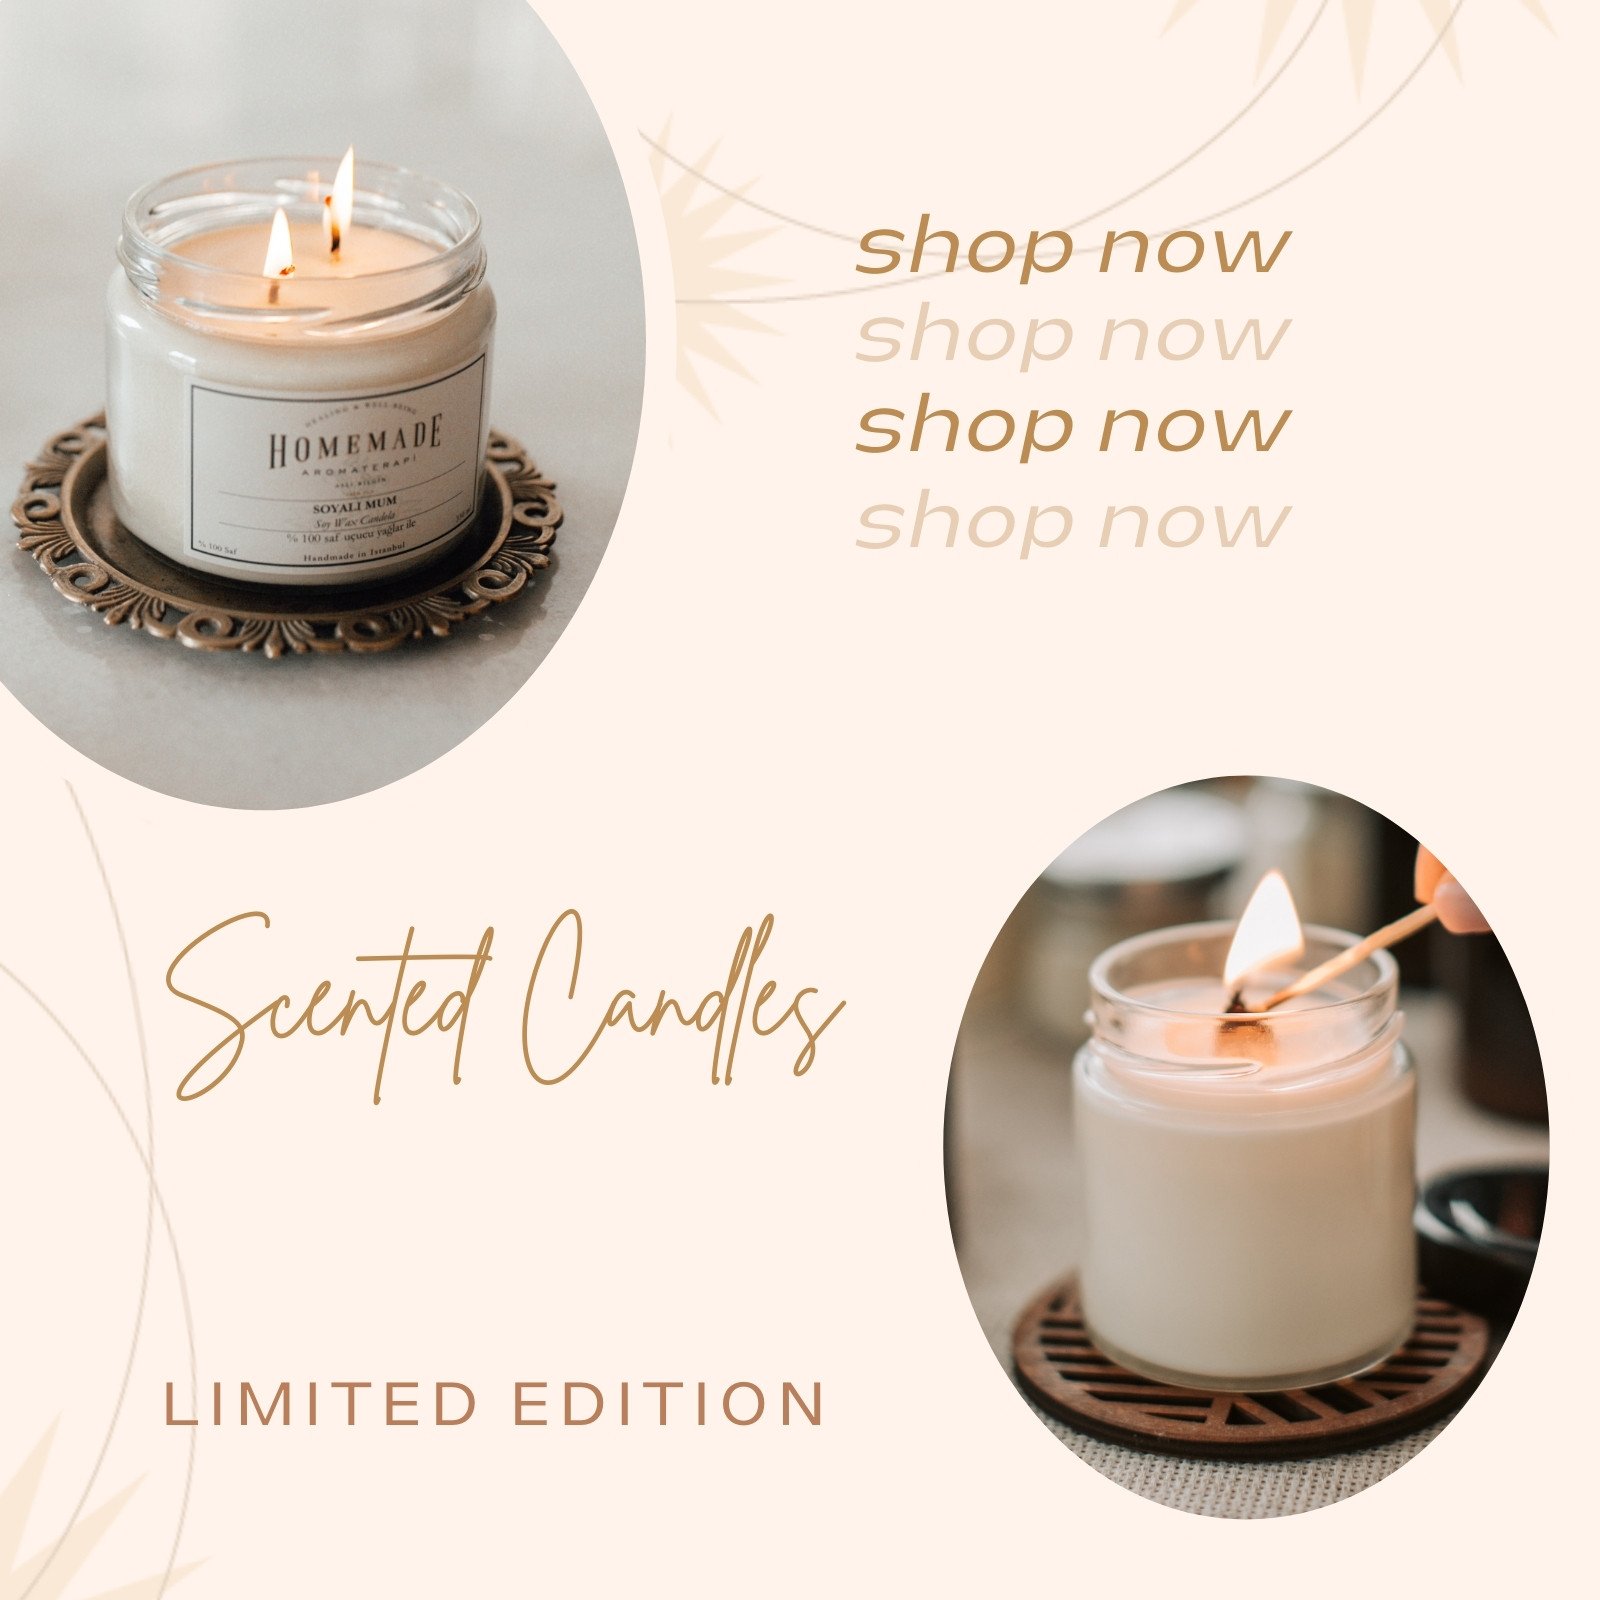 Free and customizable candles templates